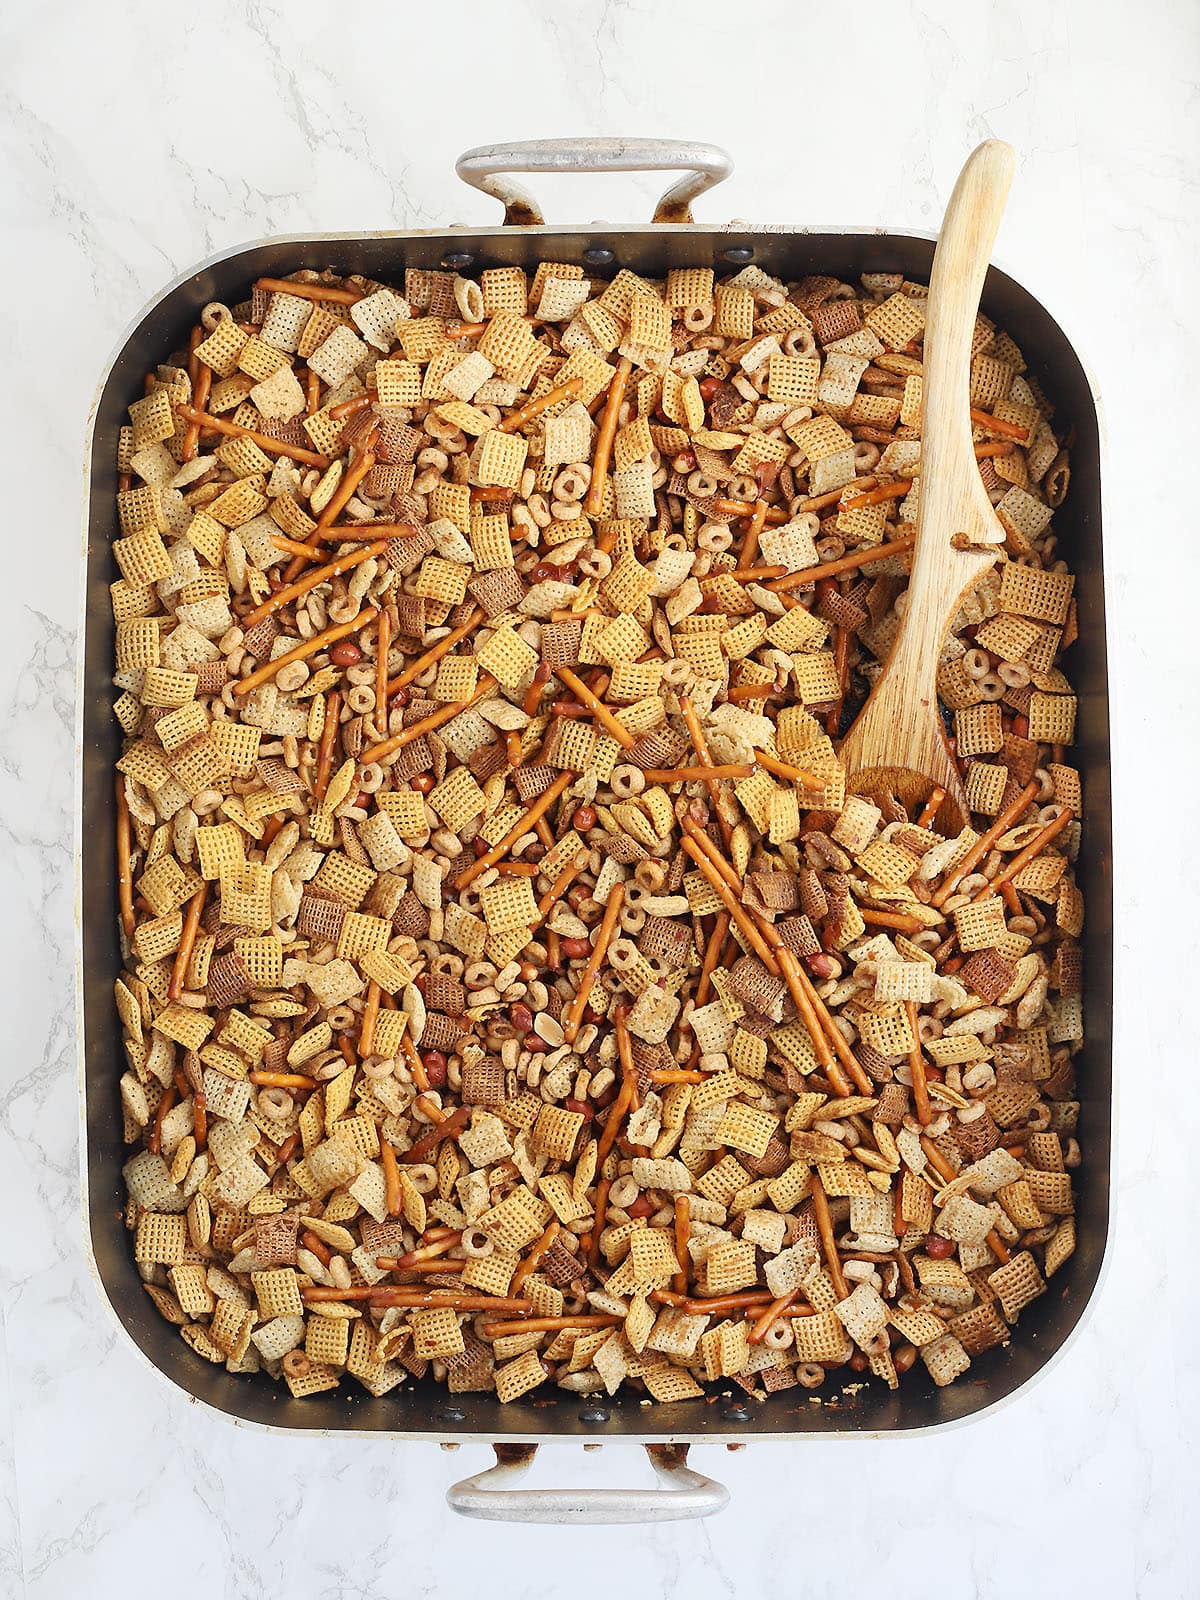 Chex mix ingredients in a large roasting pan.